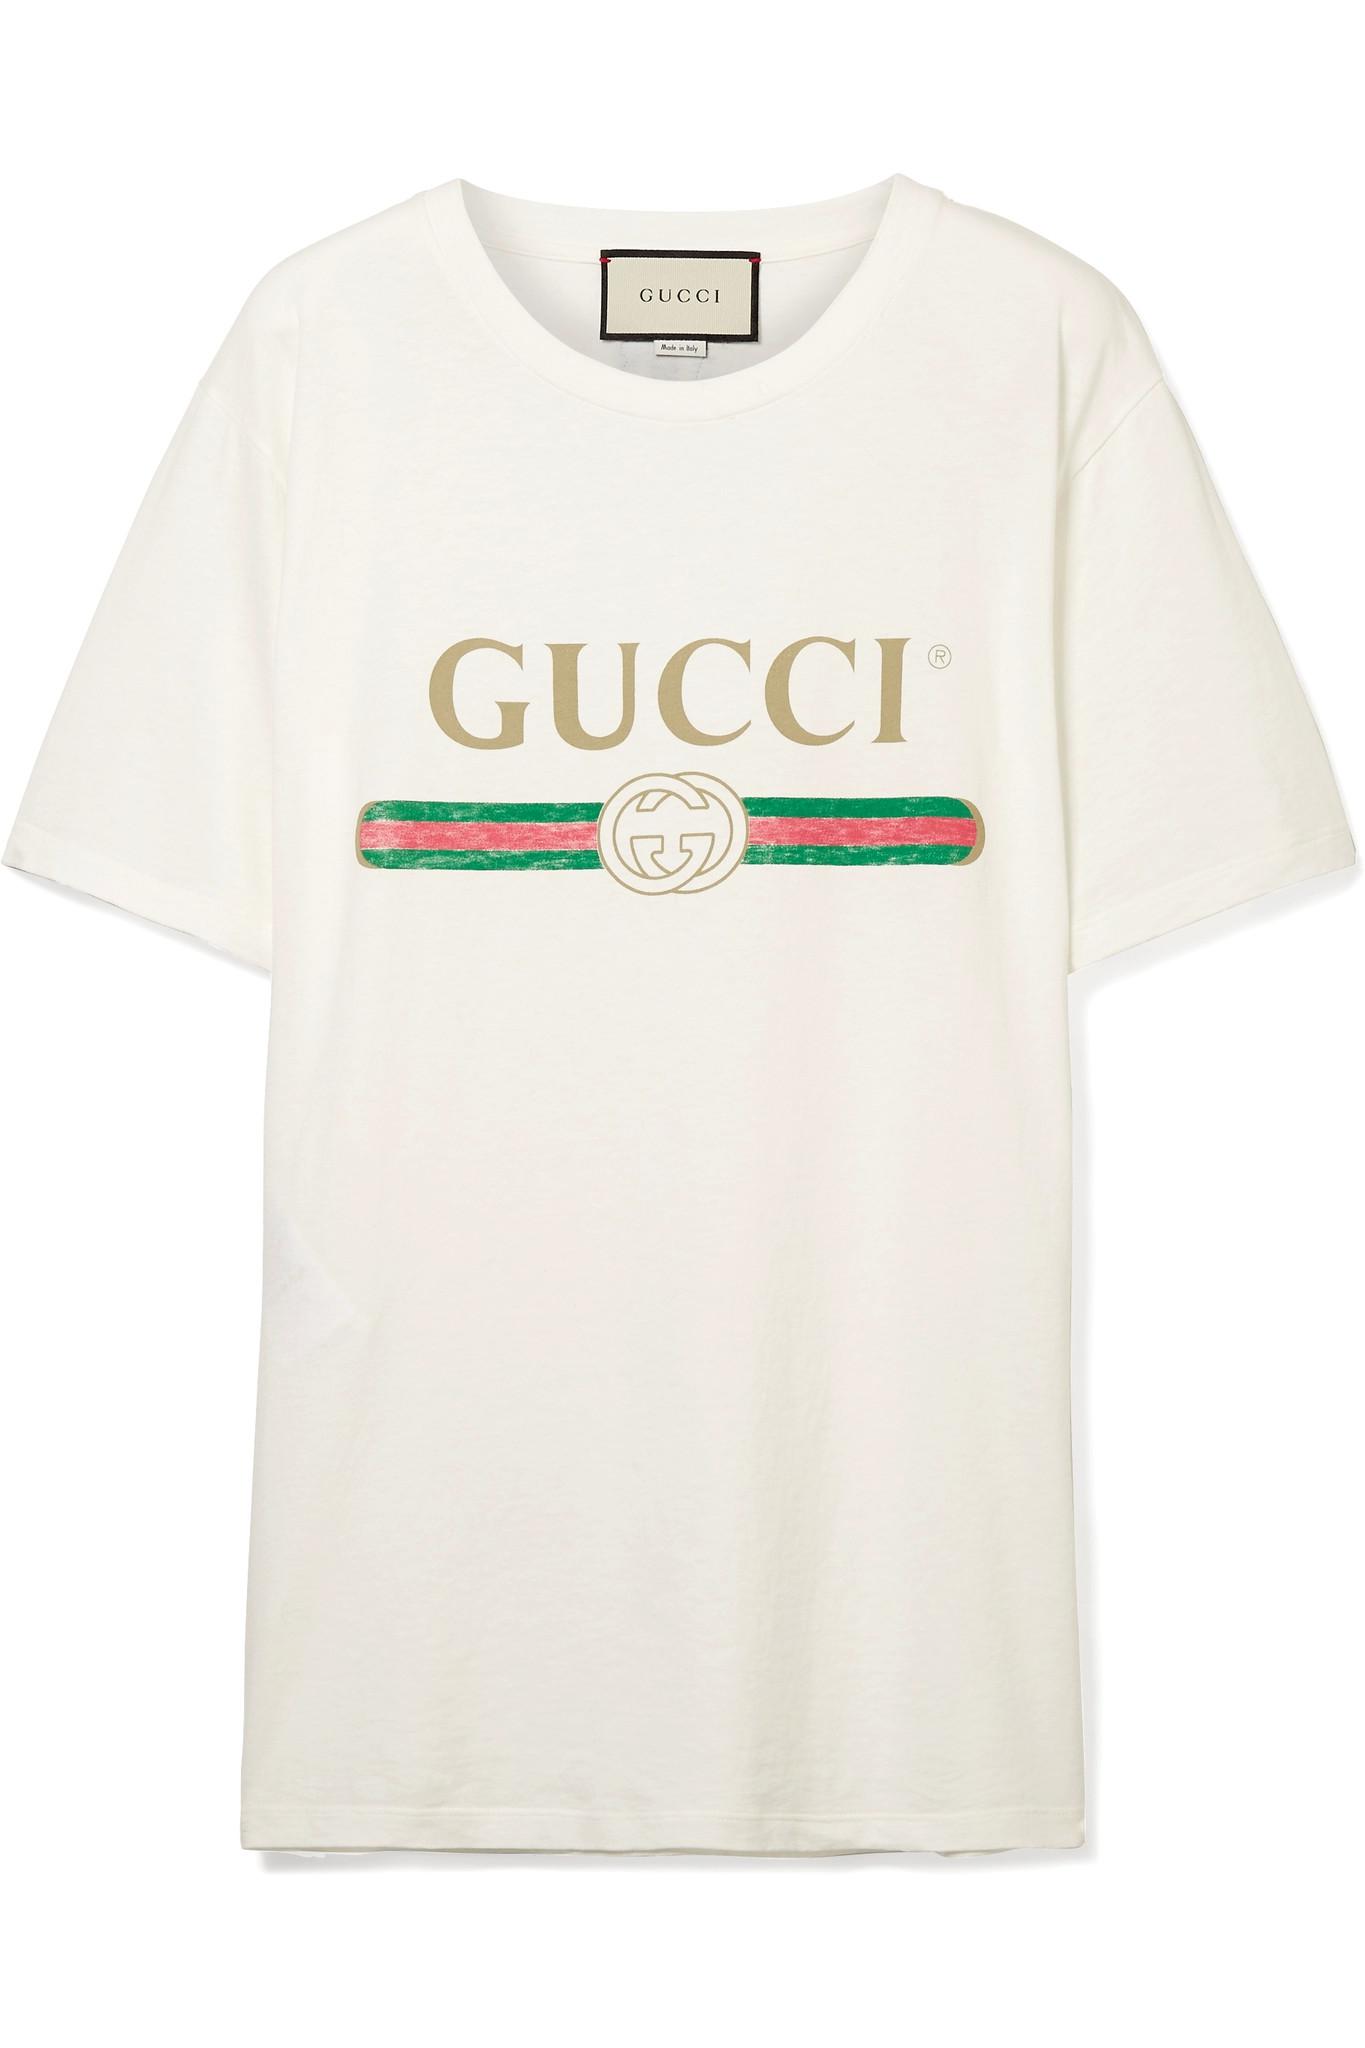 Gucci Appliquéd Distressed Printed Cotton-jersey T-shirt in Cream ...